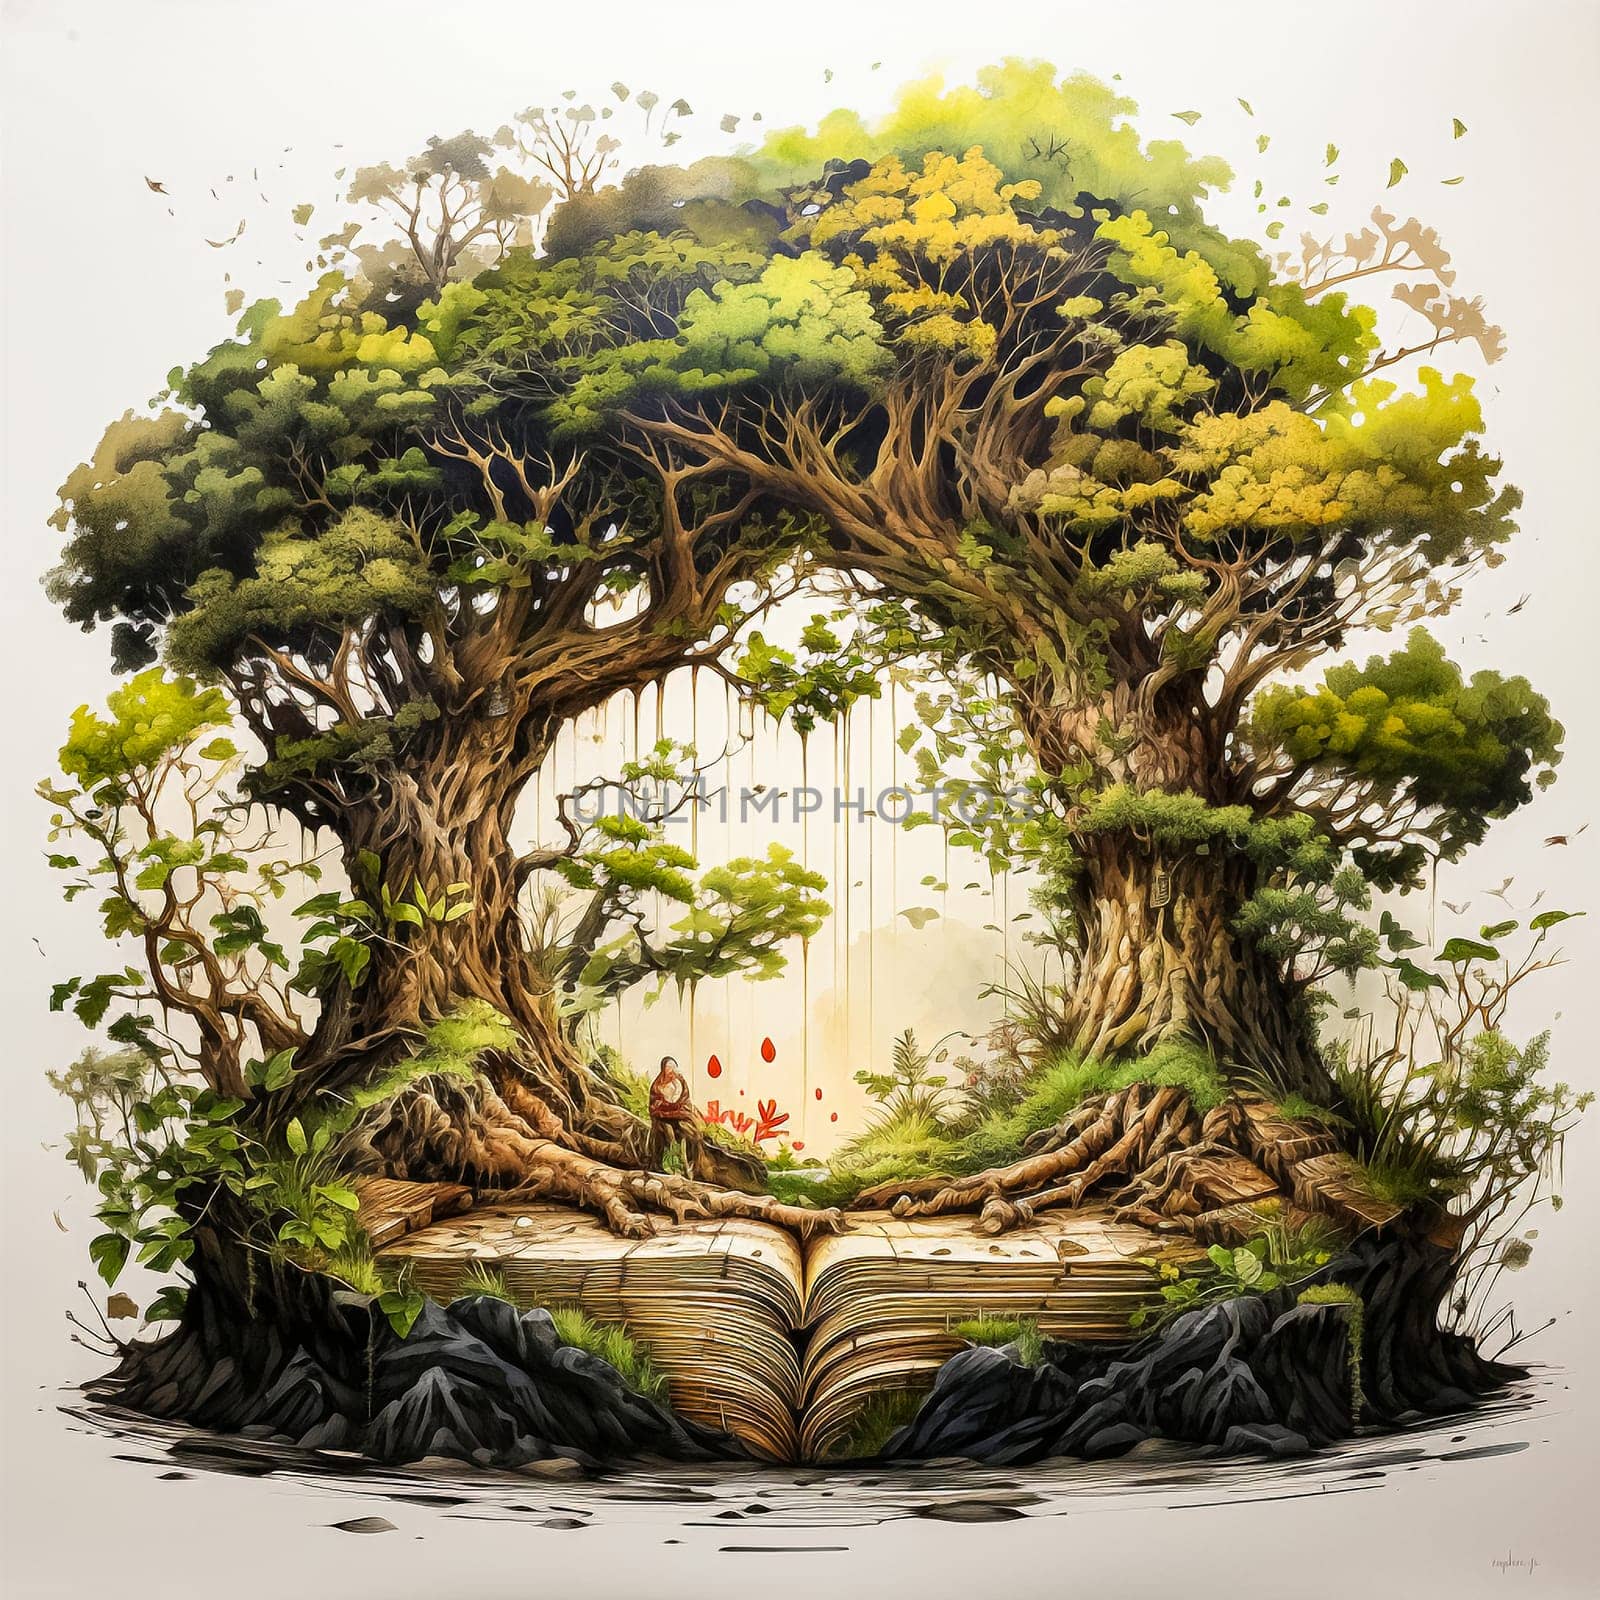 Majestic and enduring, An intricate illustration of an oak tree, symbolic of strength and longevity, set against a clean white background. Perfect for nature themed designs and artistic projects.